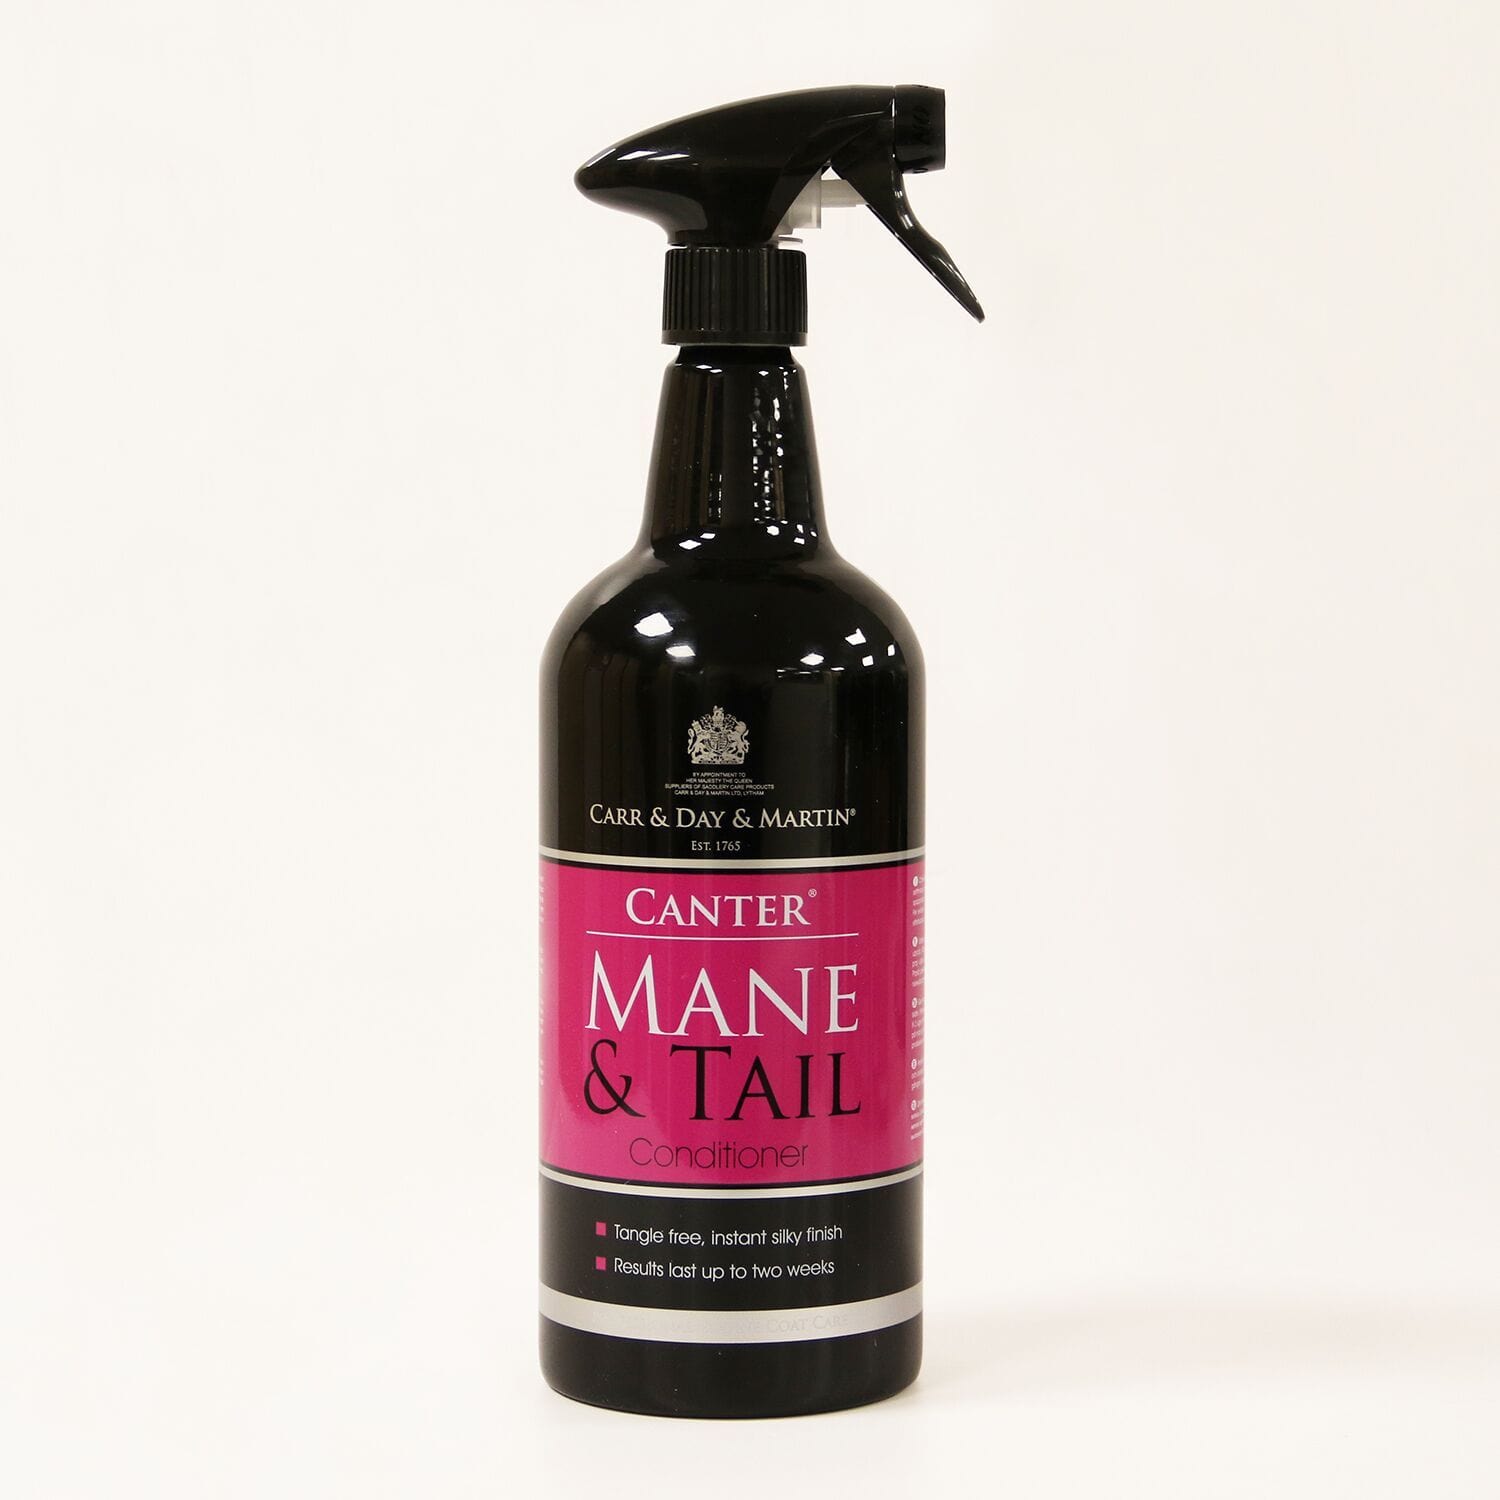 Carr & Day & Martin Canter Mane and Tail Conditioner 1L